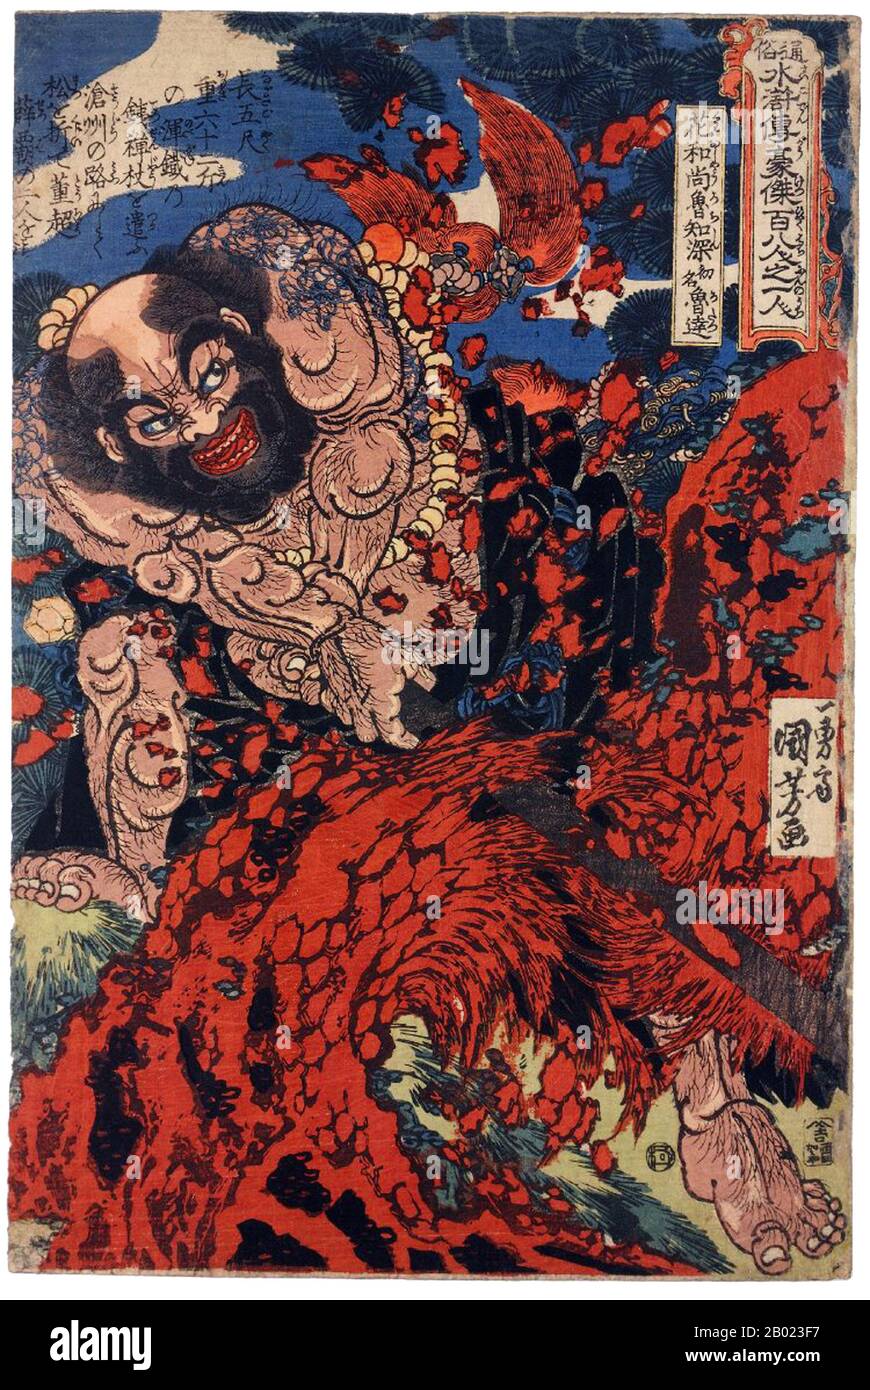 China / Japan: Lu Zhishen (Kaosho Rochishin), one of the 'One Hundred and Eight Heroes of the Water Margin'. Utagawa Kuniyoshi (1797-1863), 1827-1830. Water Margin (known in Chinese as Shuihu Zhuan, sometimes abbreviated to Shuihu), also known as Suikoden in Japanese, as well as Outlaws of the Marsh, Tale of the Marshes, All Men Are Brothers, Men of the Marshes, or The Marshes of Mount Liang, is a 14th century novel and one of the Four Great Classical Novels of Chinese literature. Attributed to Shi Nai'an and written in vernacular Chinese. Stock Photo